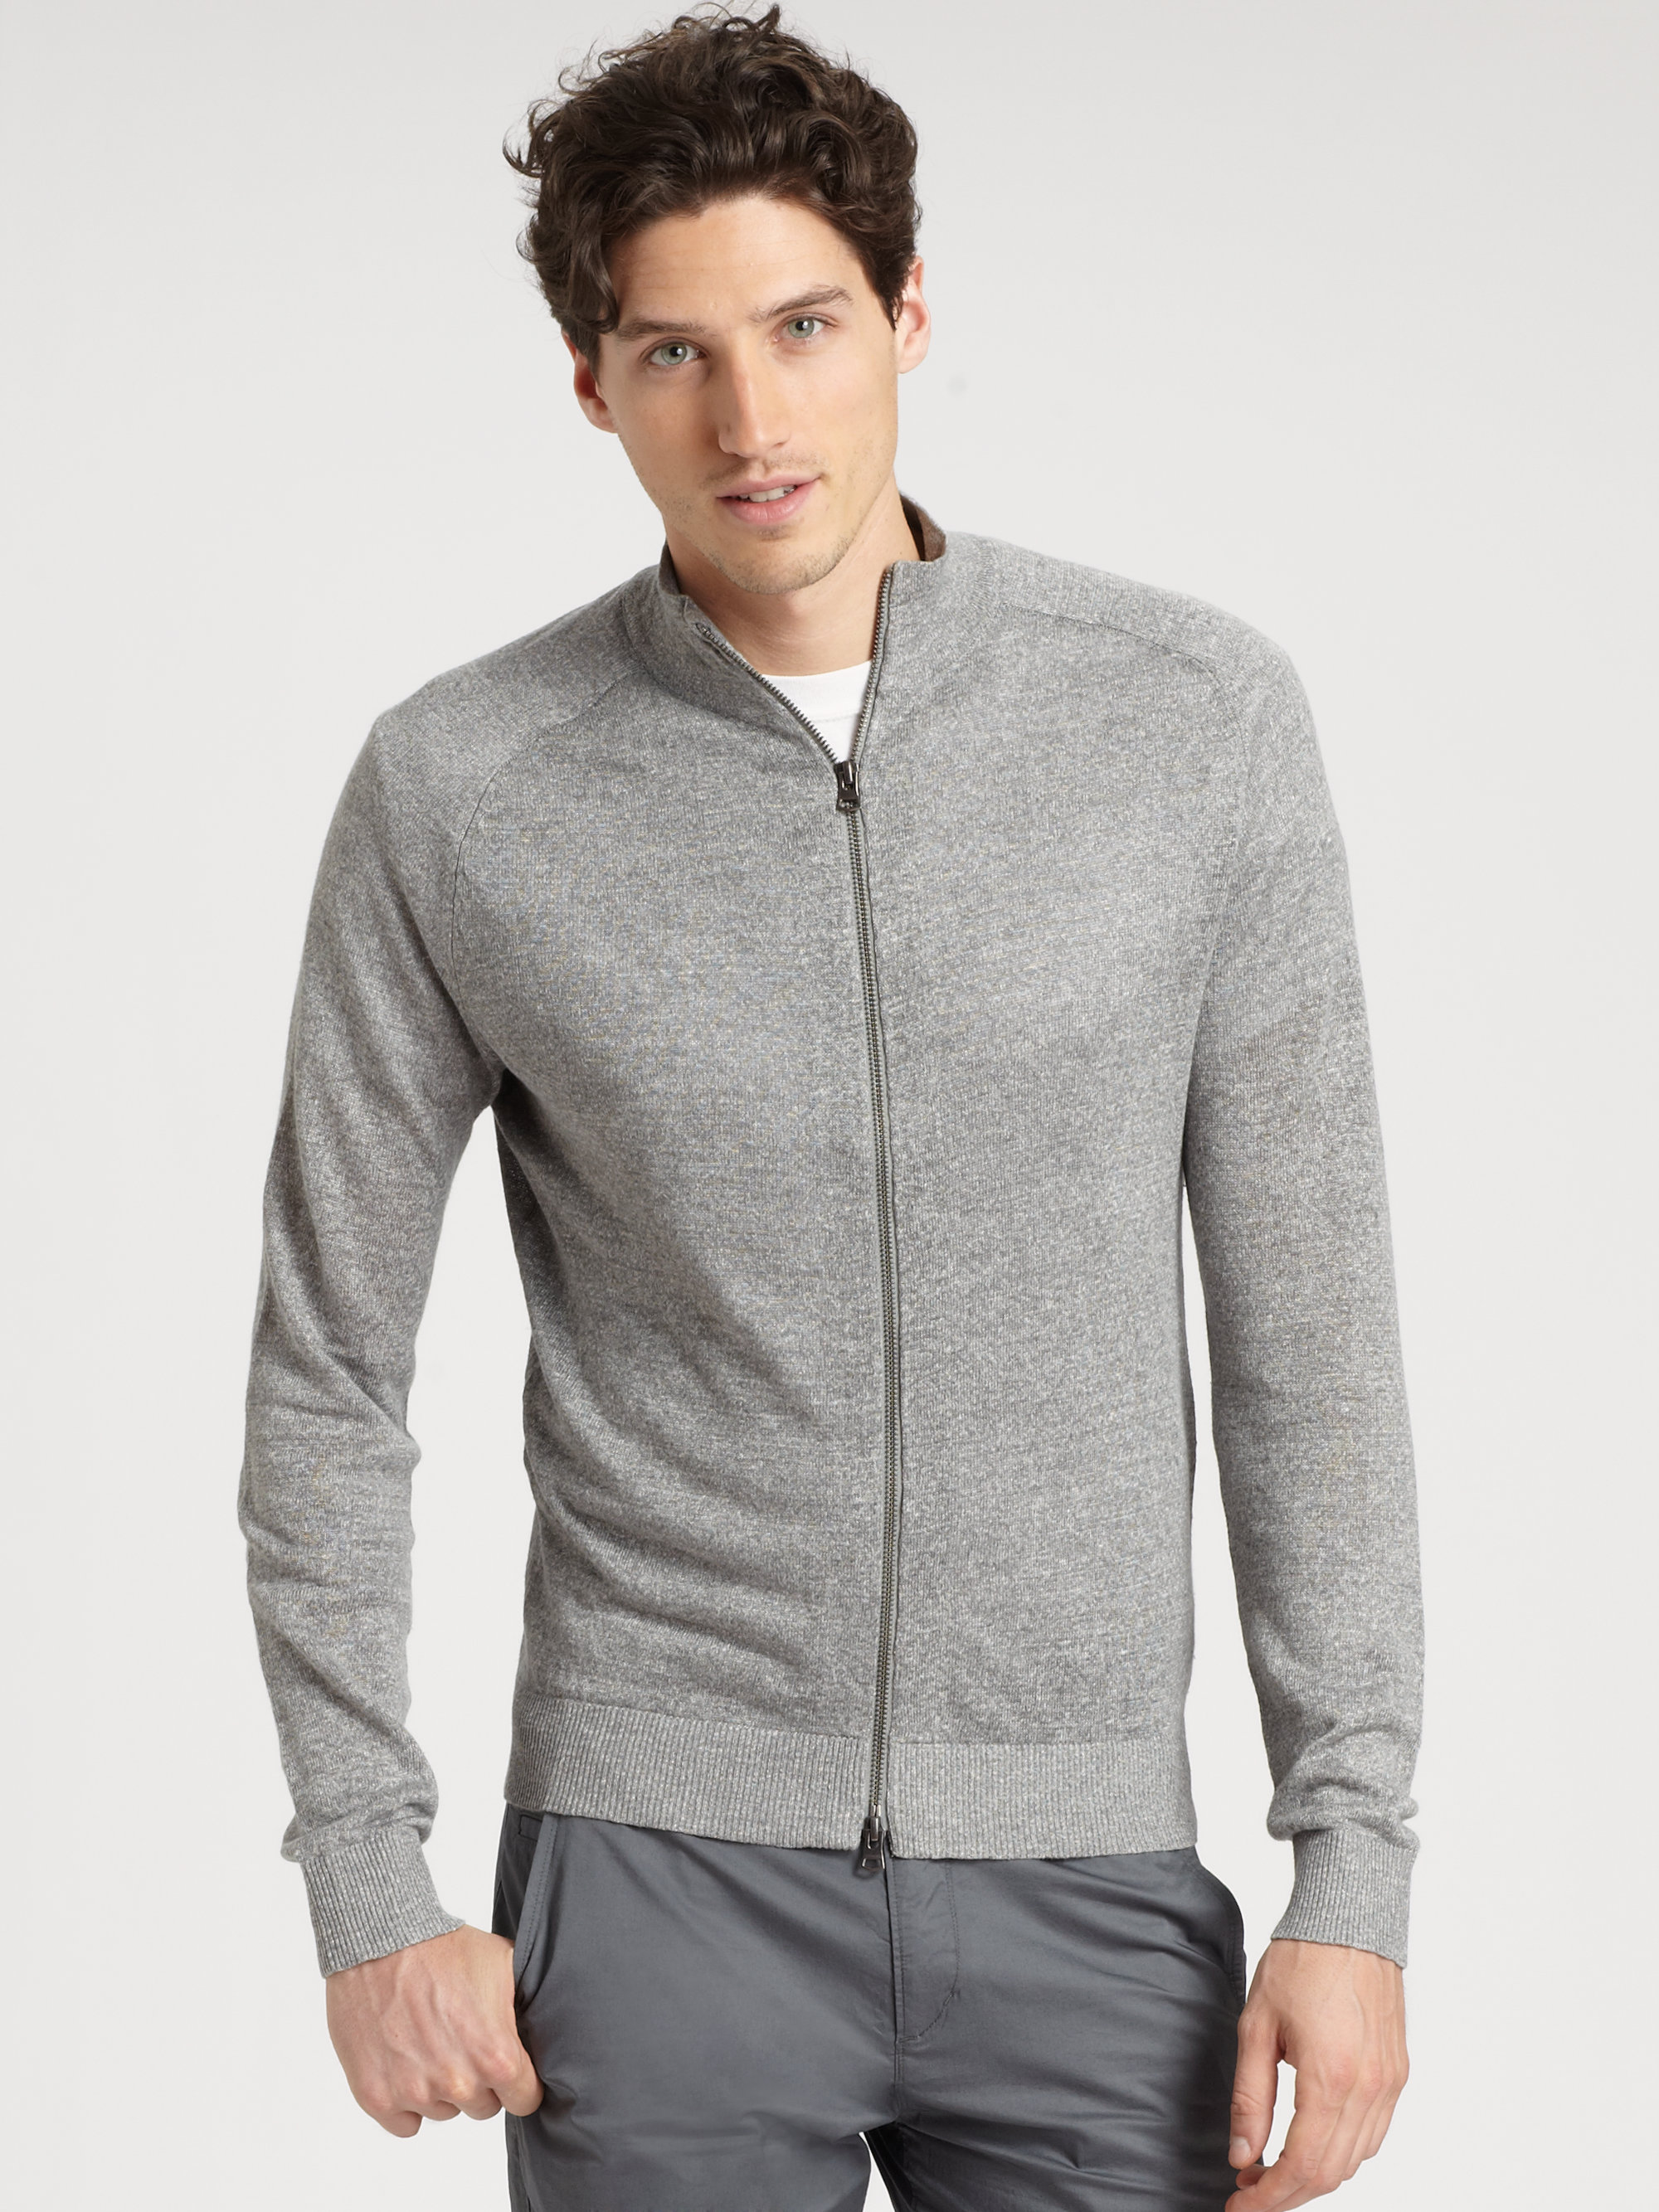 Lyst - Theory Linen Zipup Sweater in Gray for Men